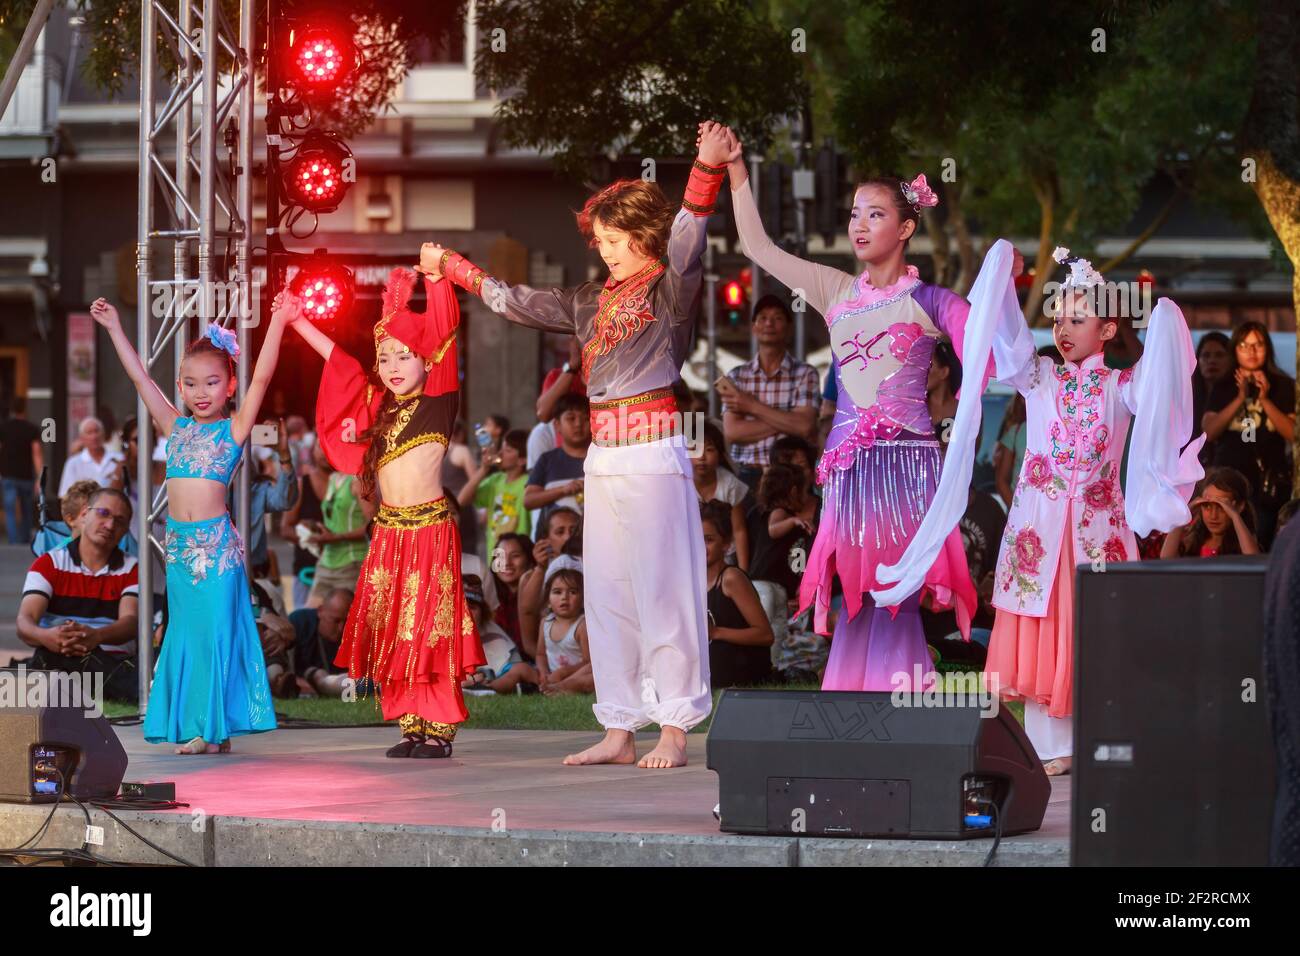 Children in the clothing of various Chinese ethnic groups on stage during Chinese New Year celebrations. Hamilton, New Zealand Stock Photo